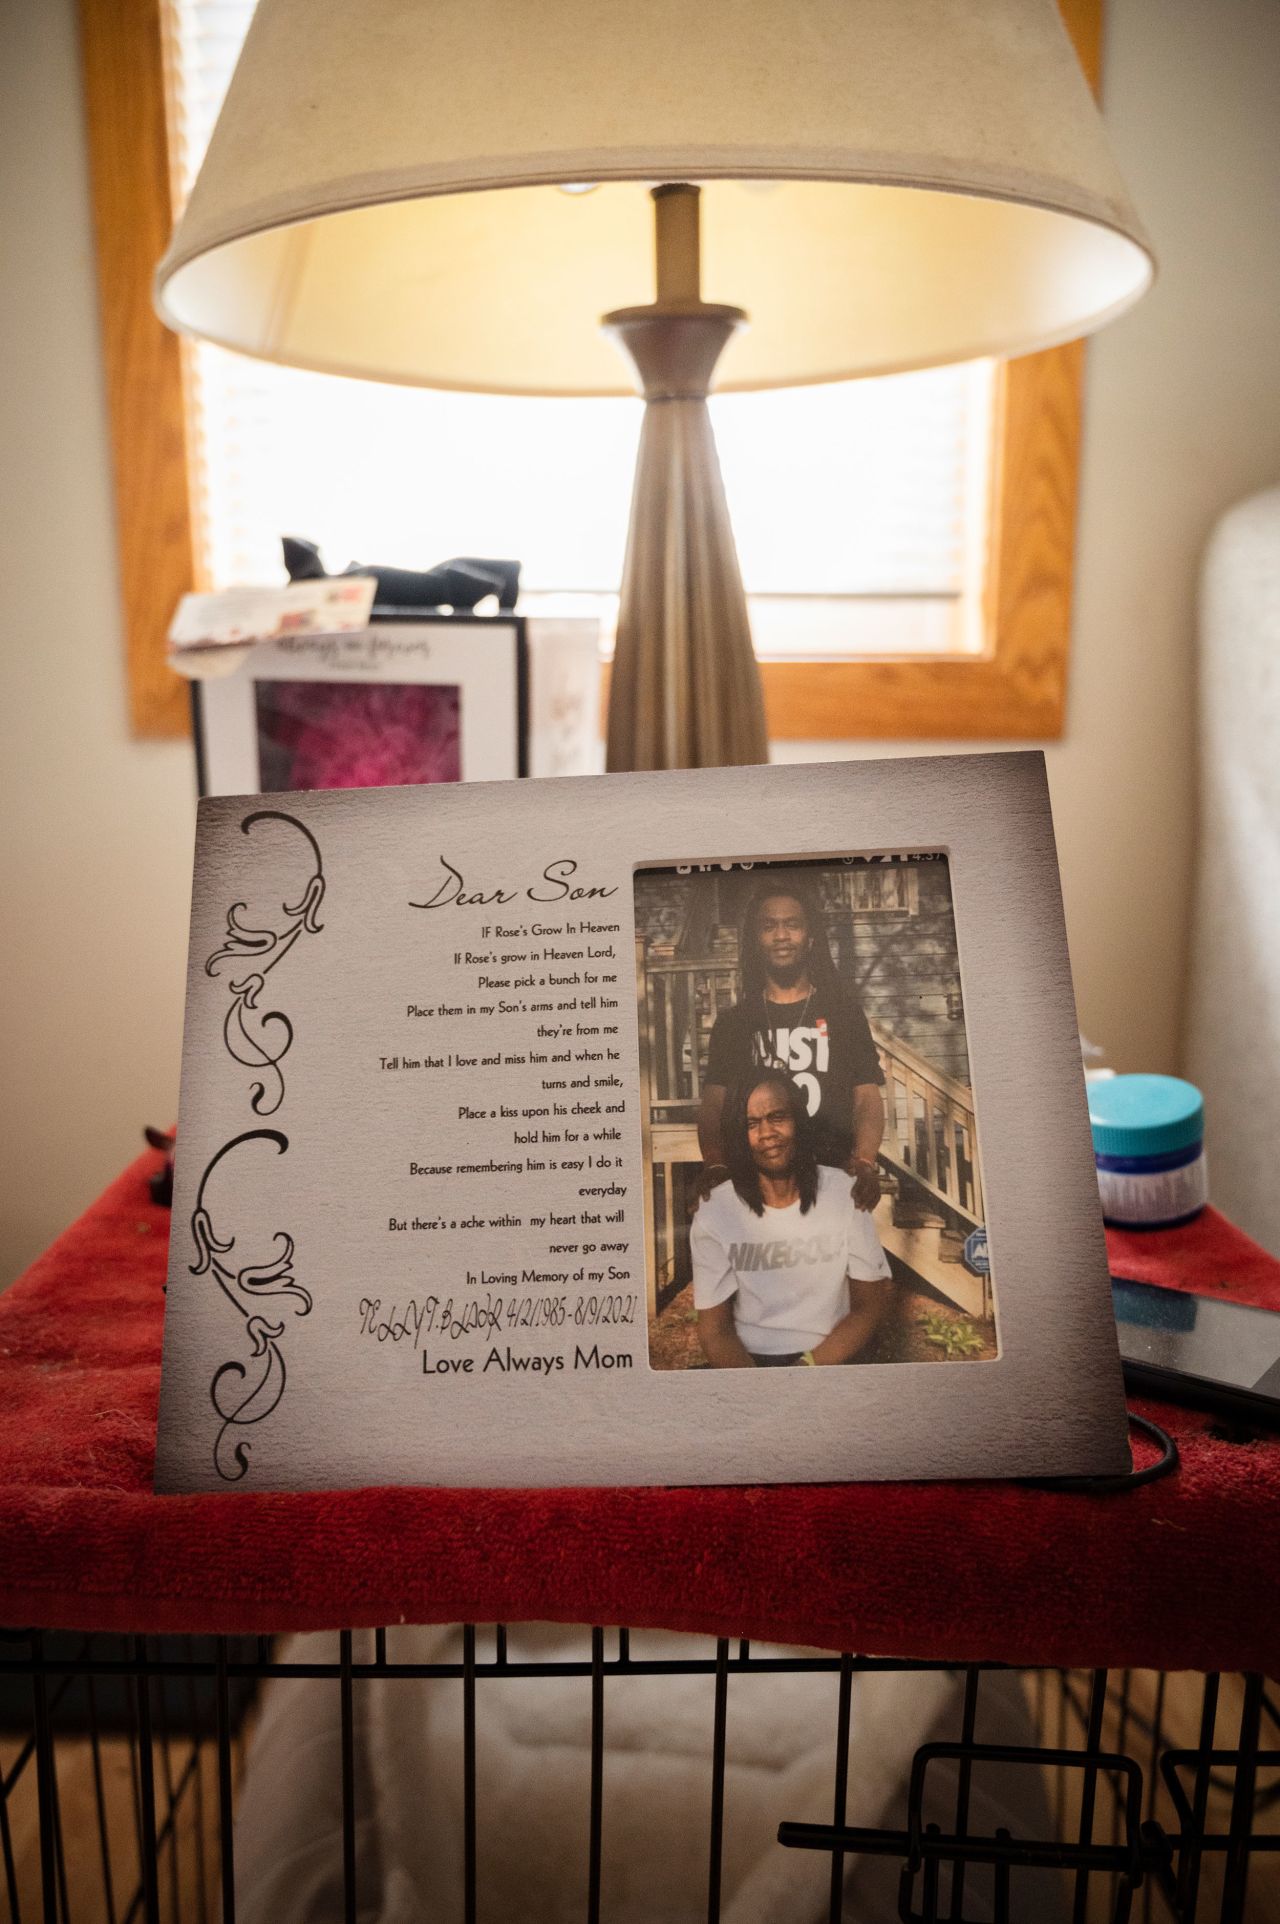 A photo of Telly Blair and his mother, Marnette, rests on a table in their home in north Minneapolis. - (Marnette Gordon, 61, mother of Telly Blair, 36, who lost his life to gun violence in north Minneapolis, photographed in her home.)